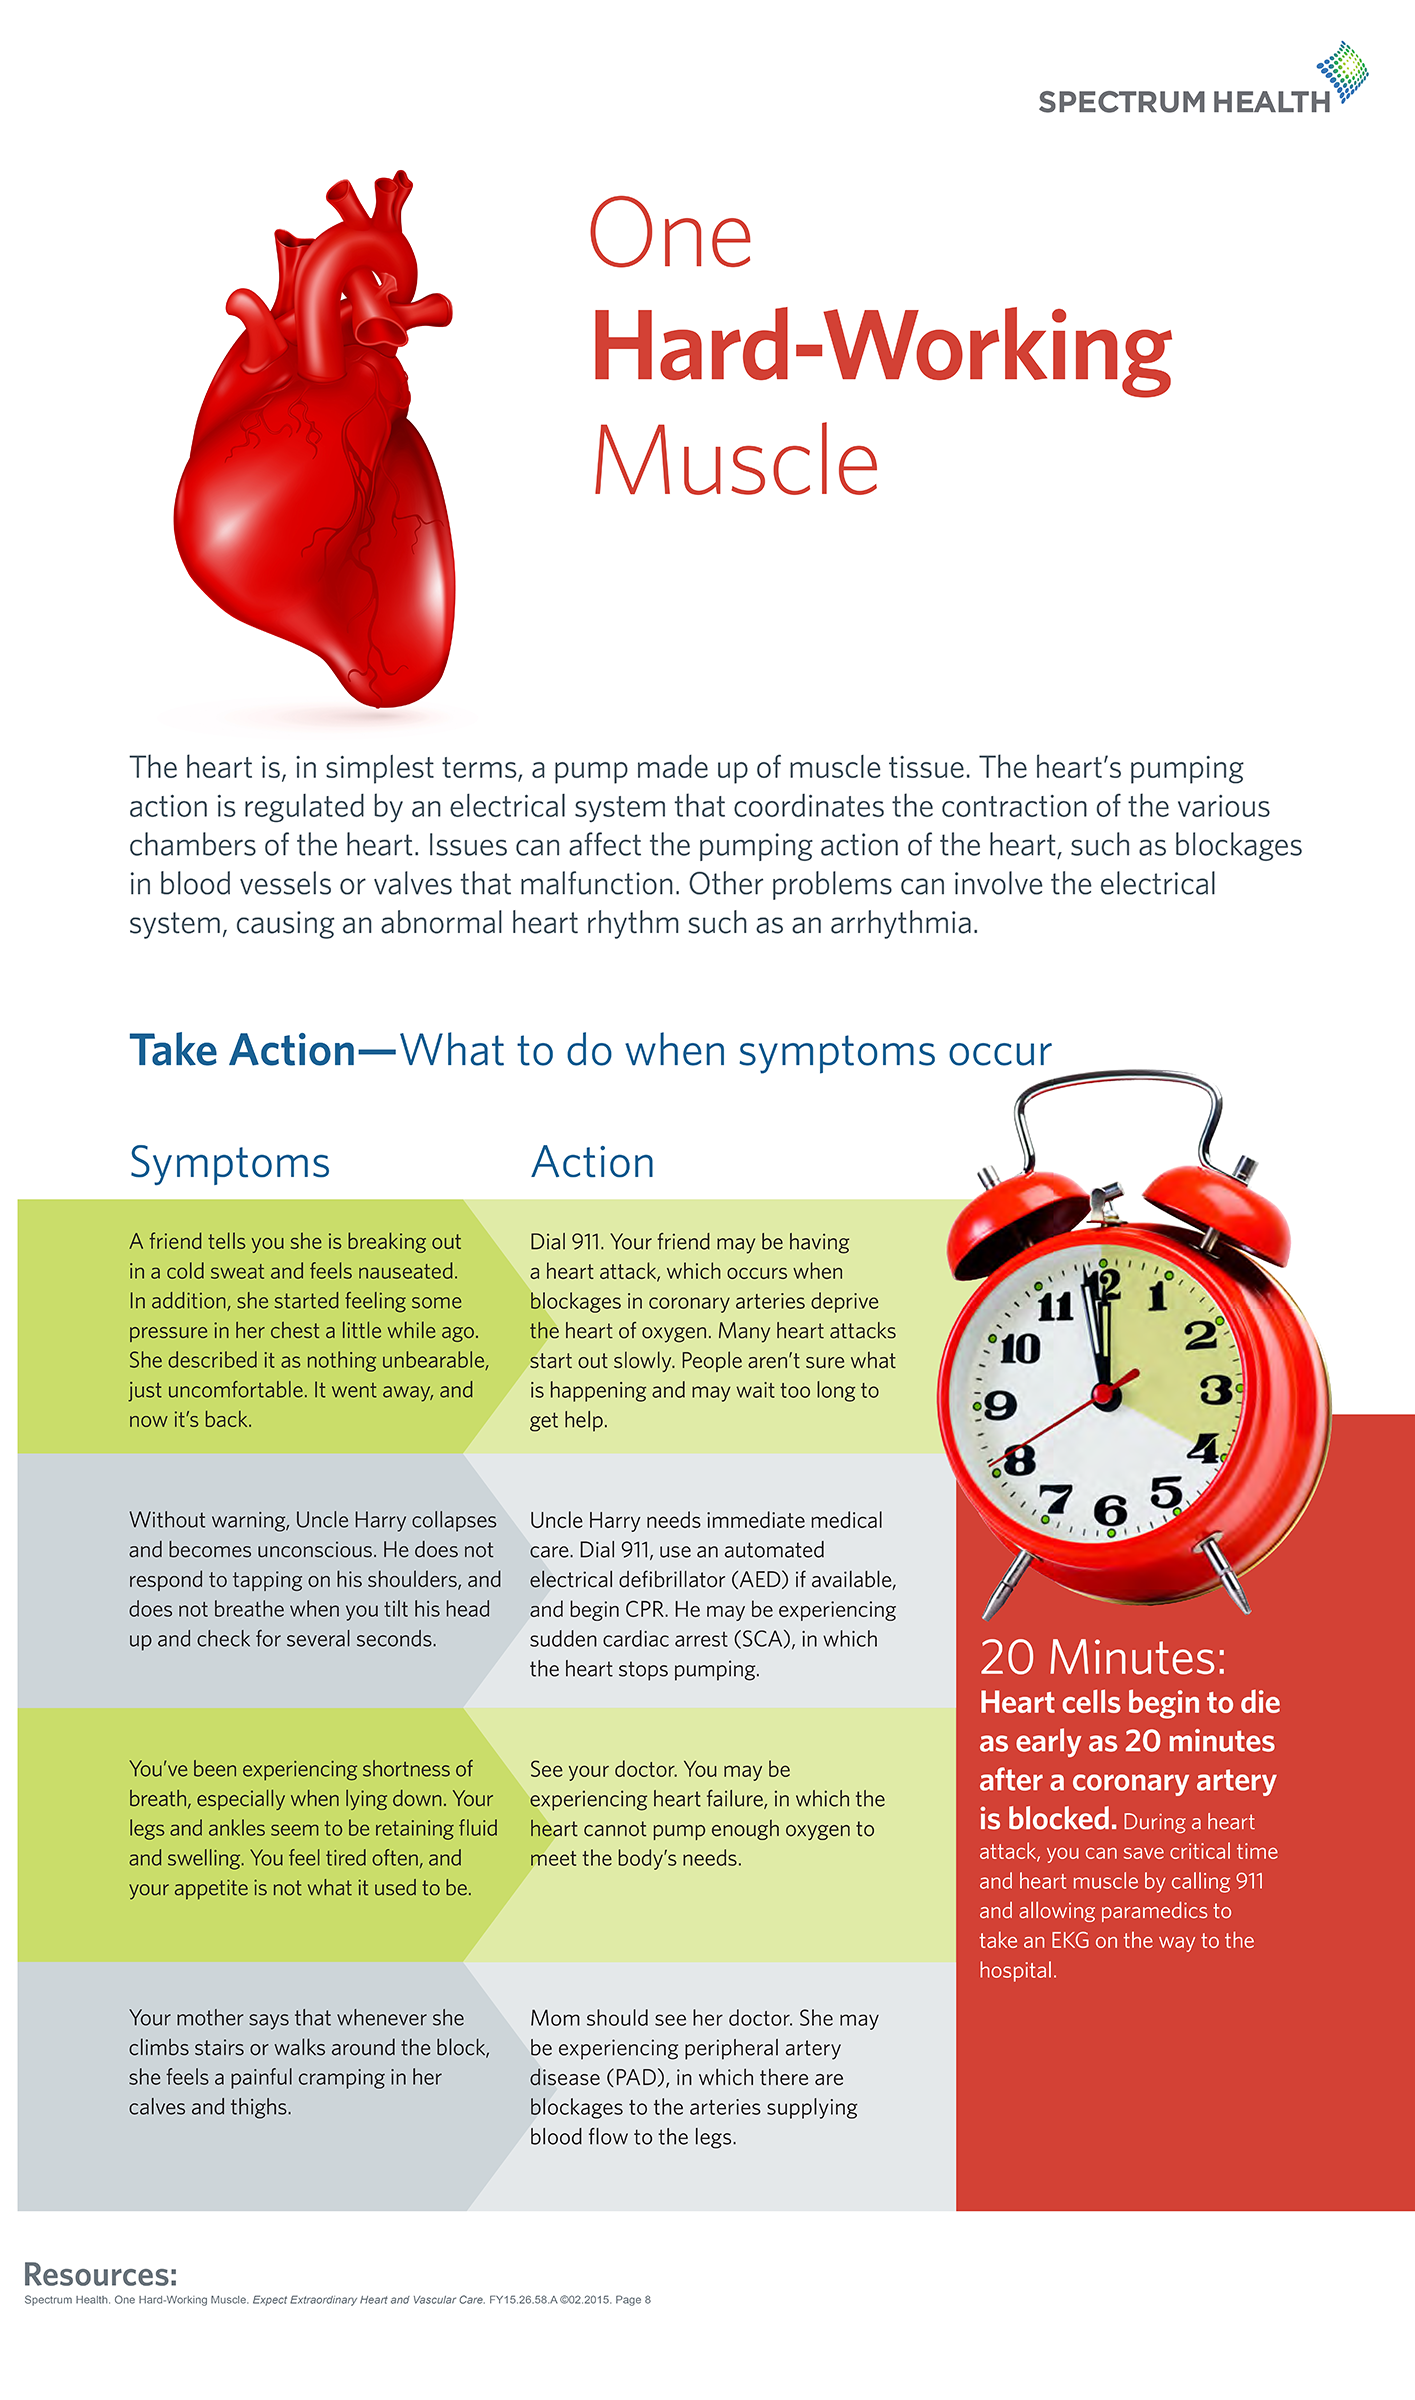 Take action: What to do when symptoms occur